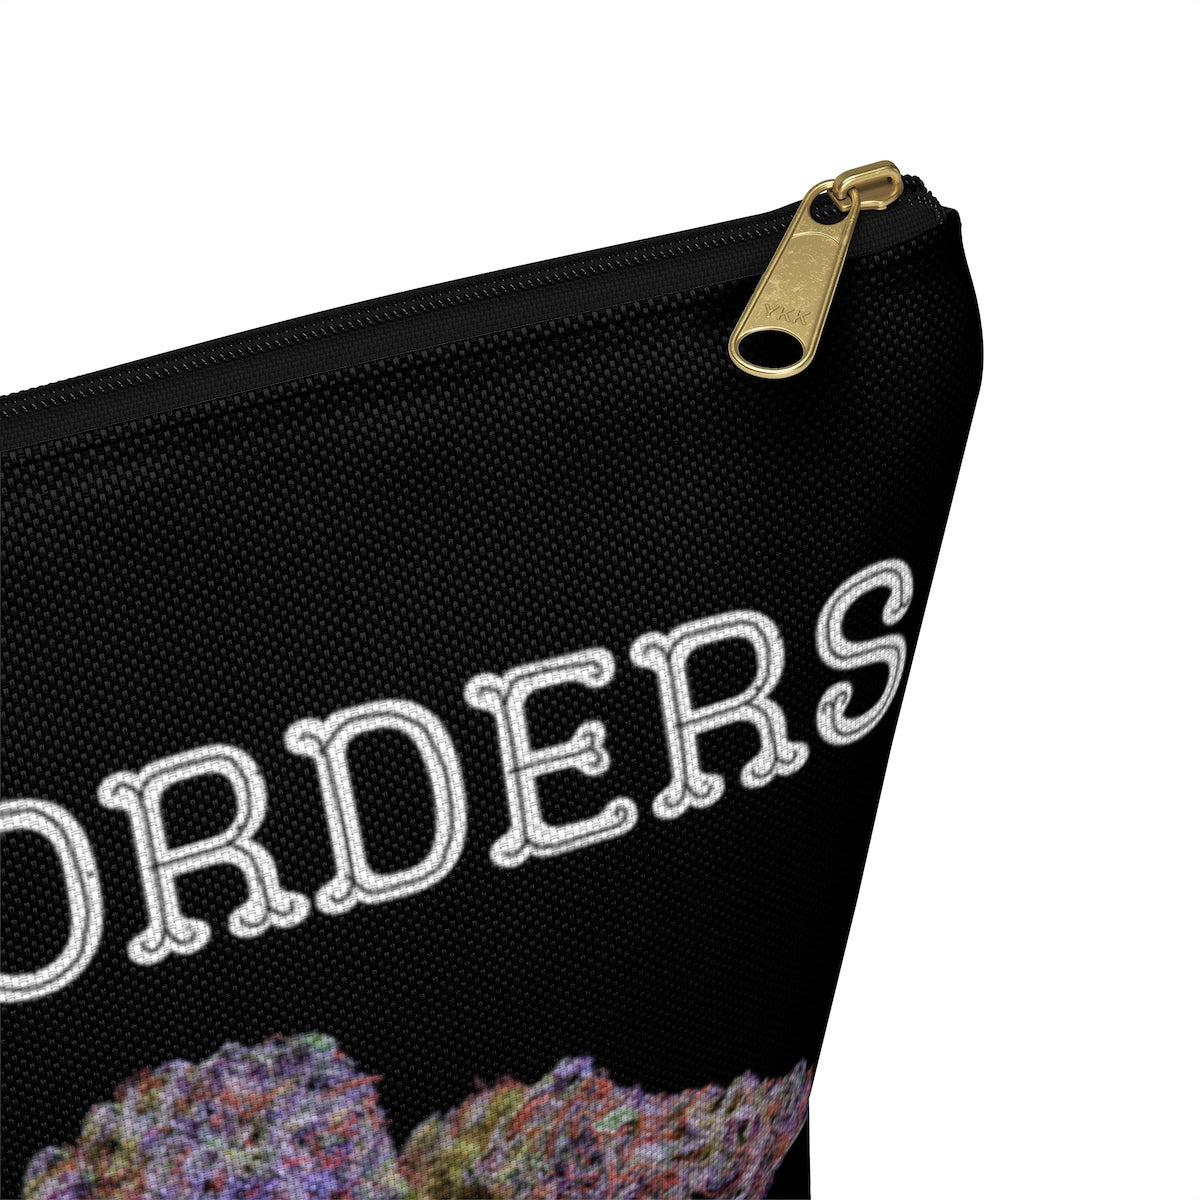 Doctor's Orders Cannabis Accessory Pouch